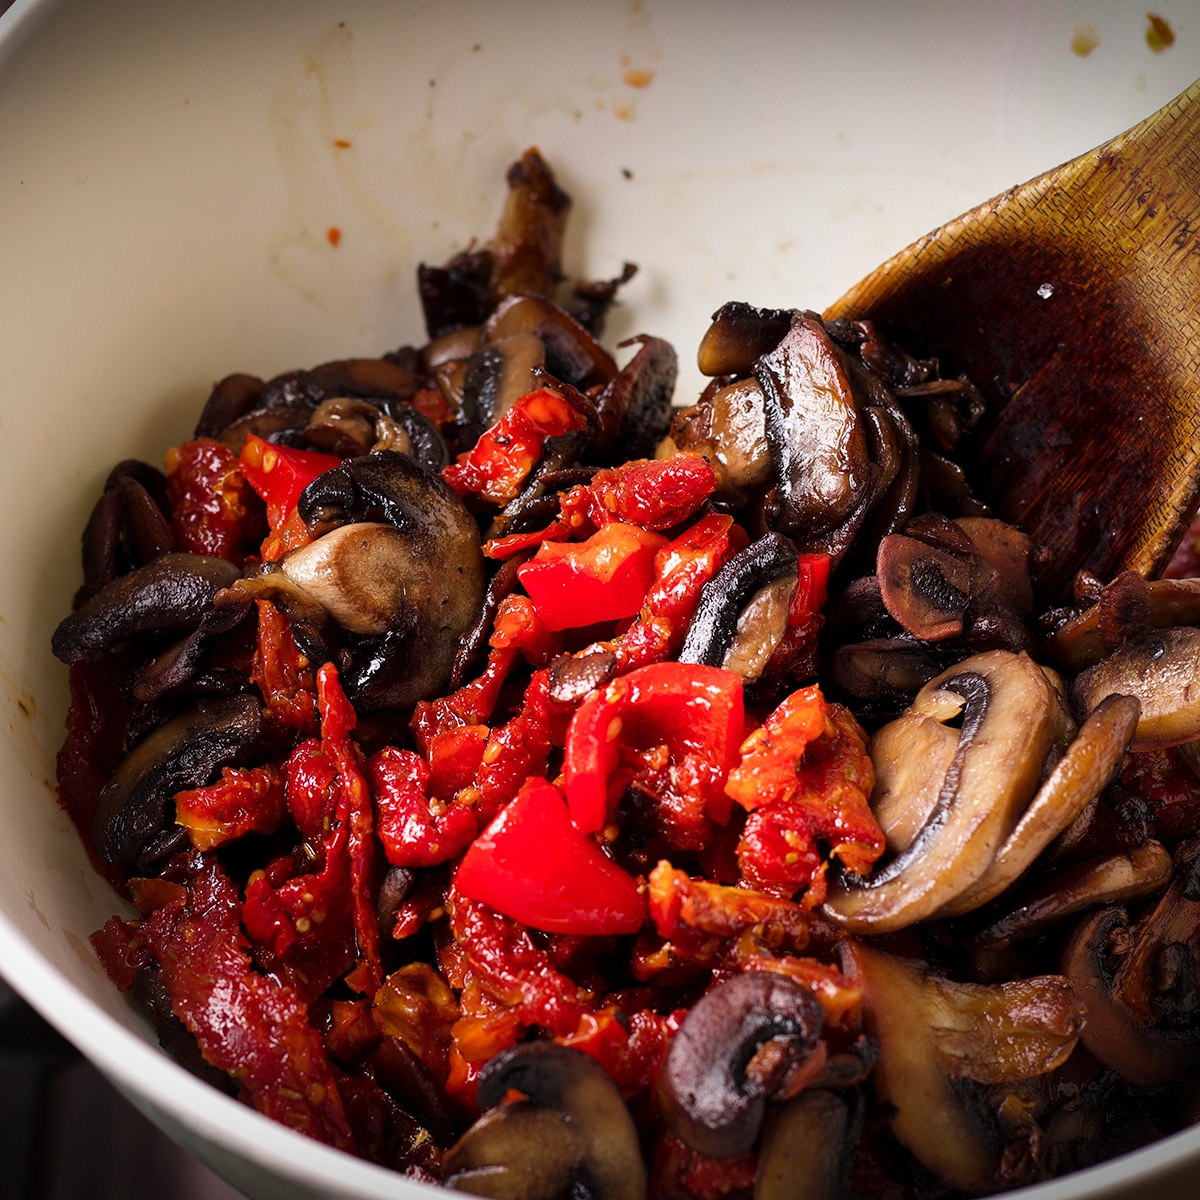 A white bowl containing cooked mushrooms, chopped roasted red peppers, and sun dried tomatoes.